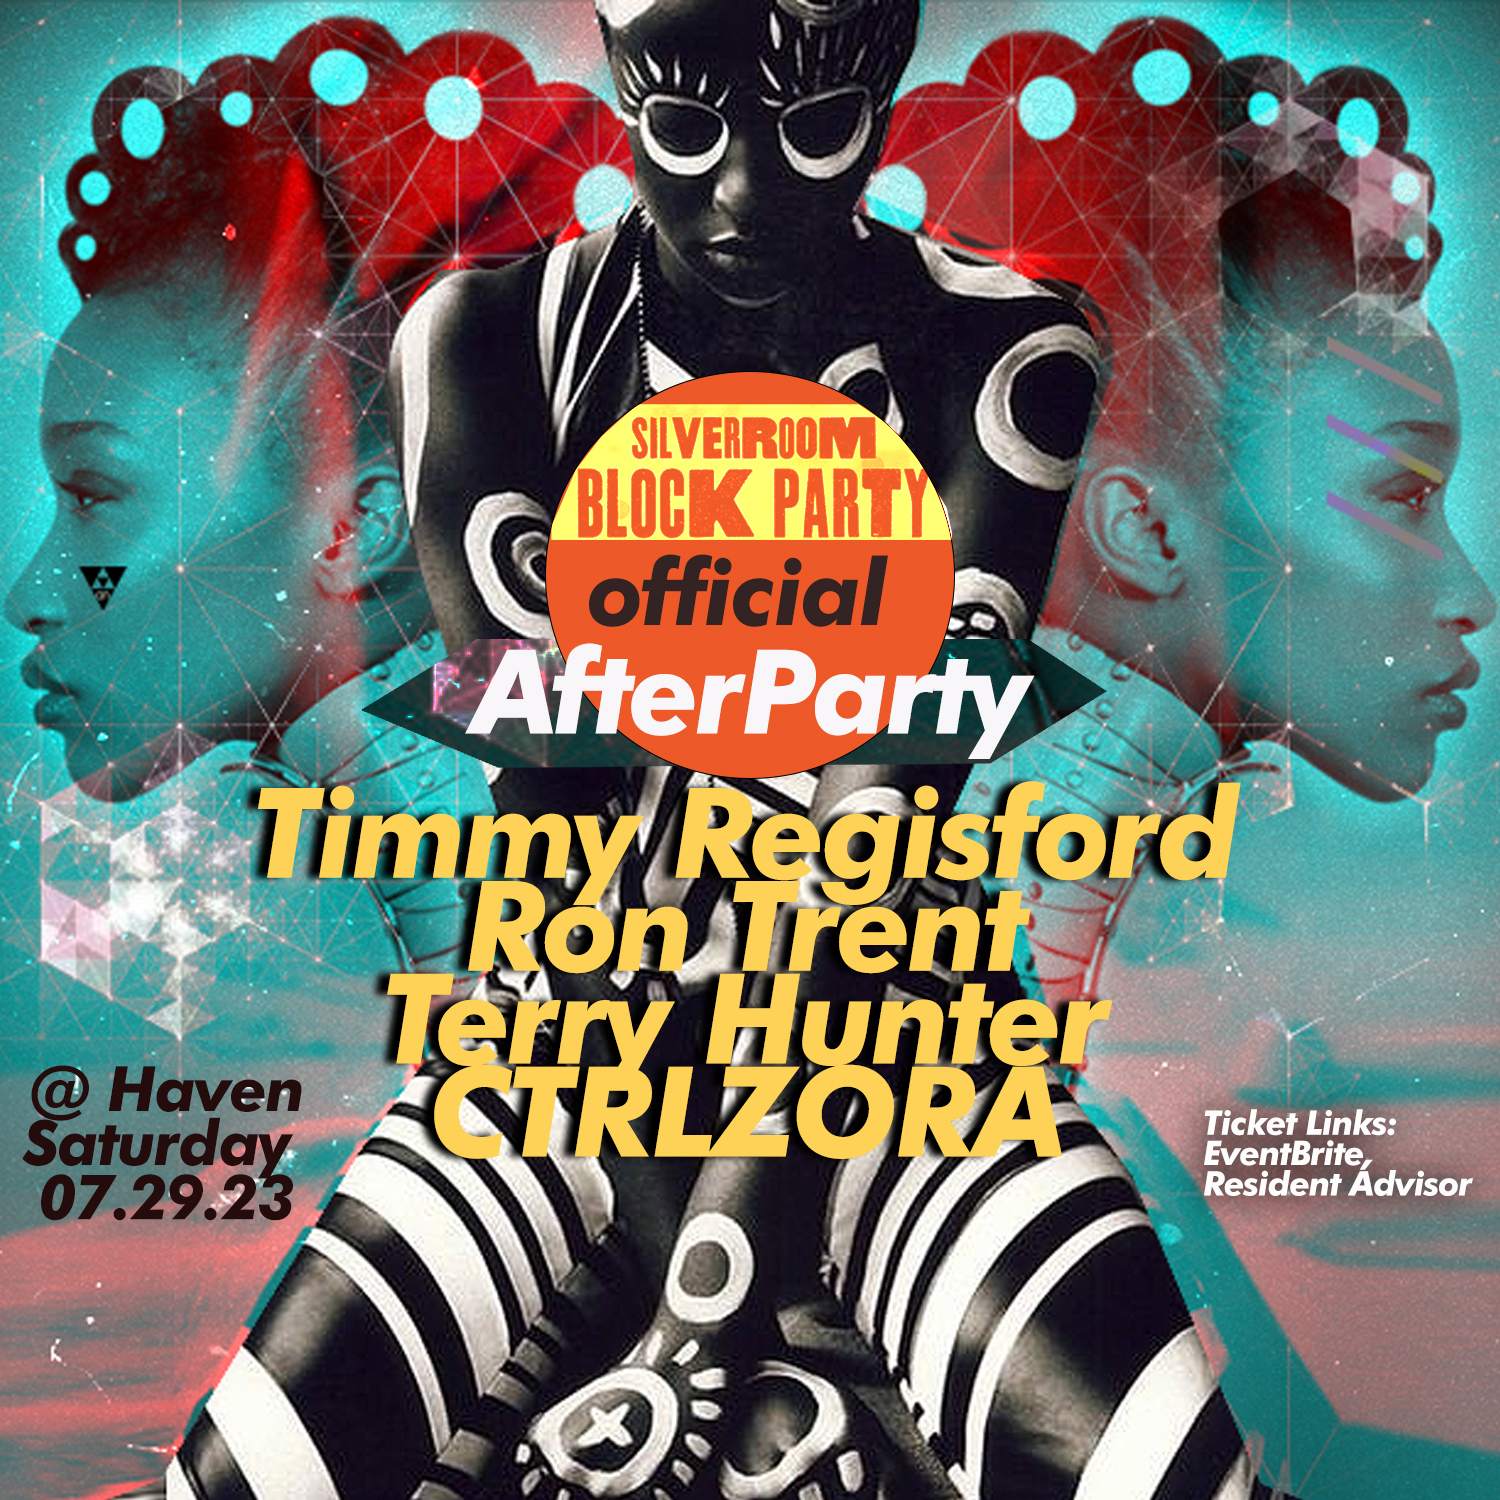 Silver Room Block Party Official After Party - Página frontal